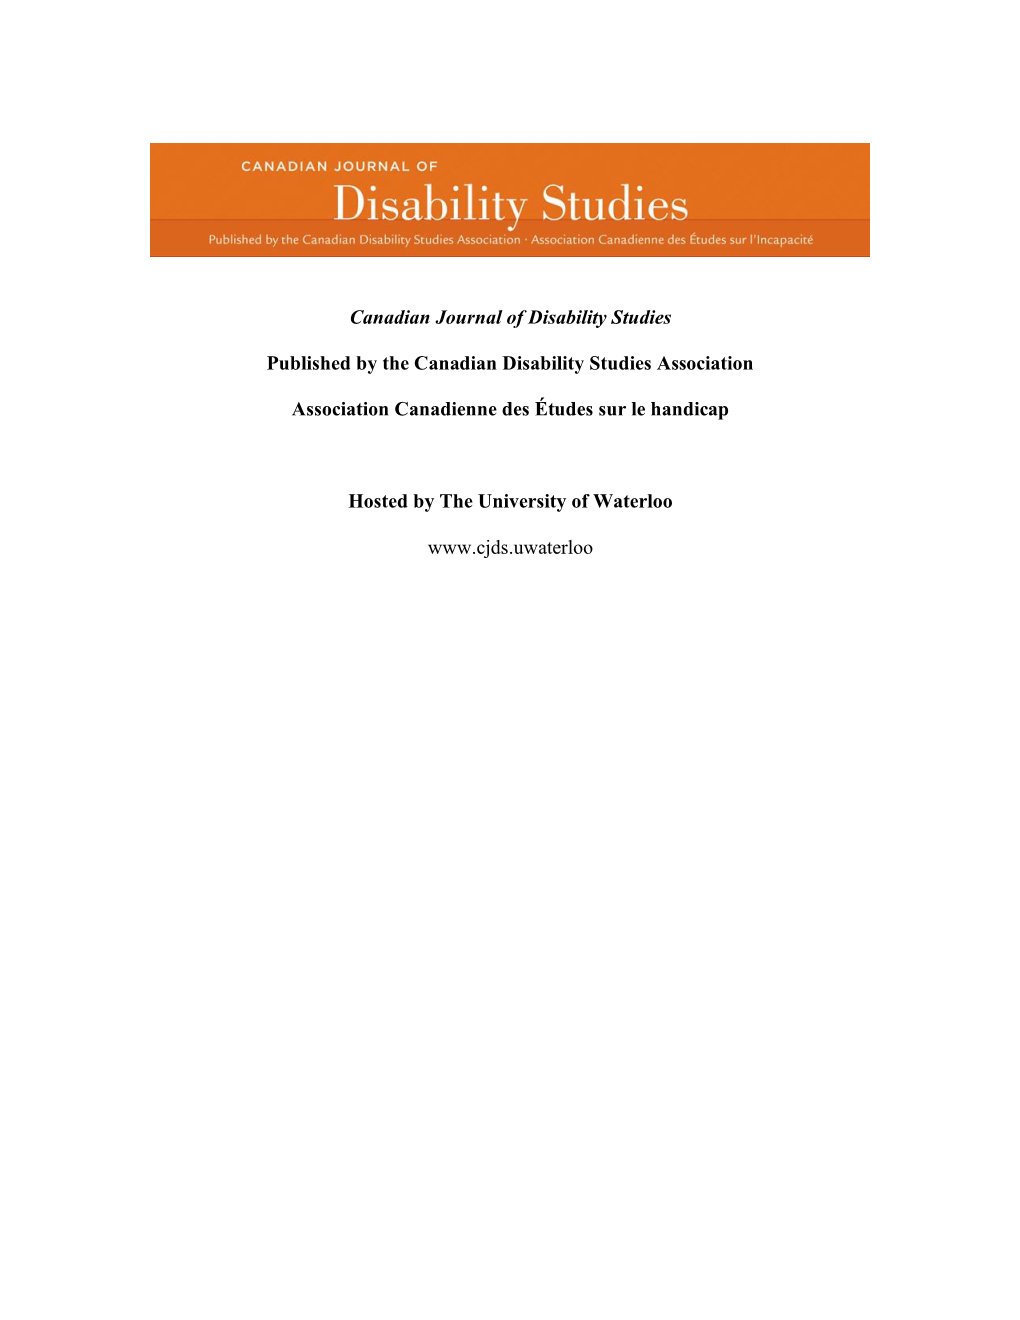 Canadian Journal of Disability Studies Published by the Canadian